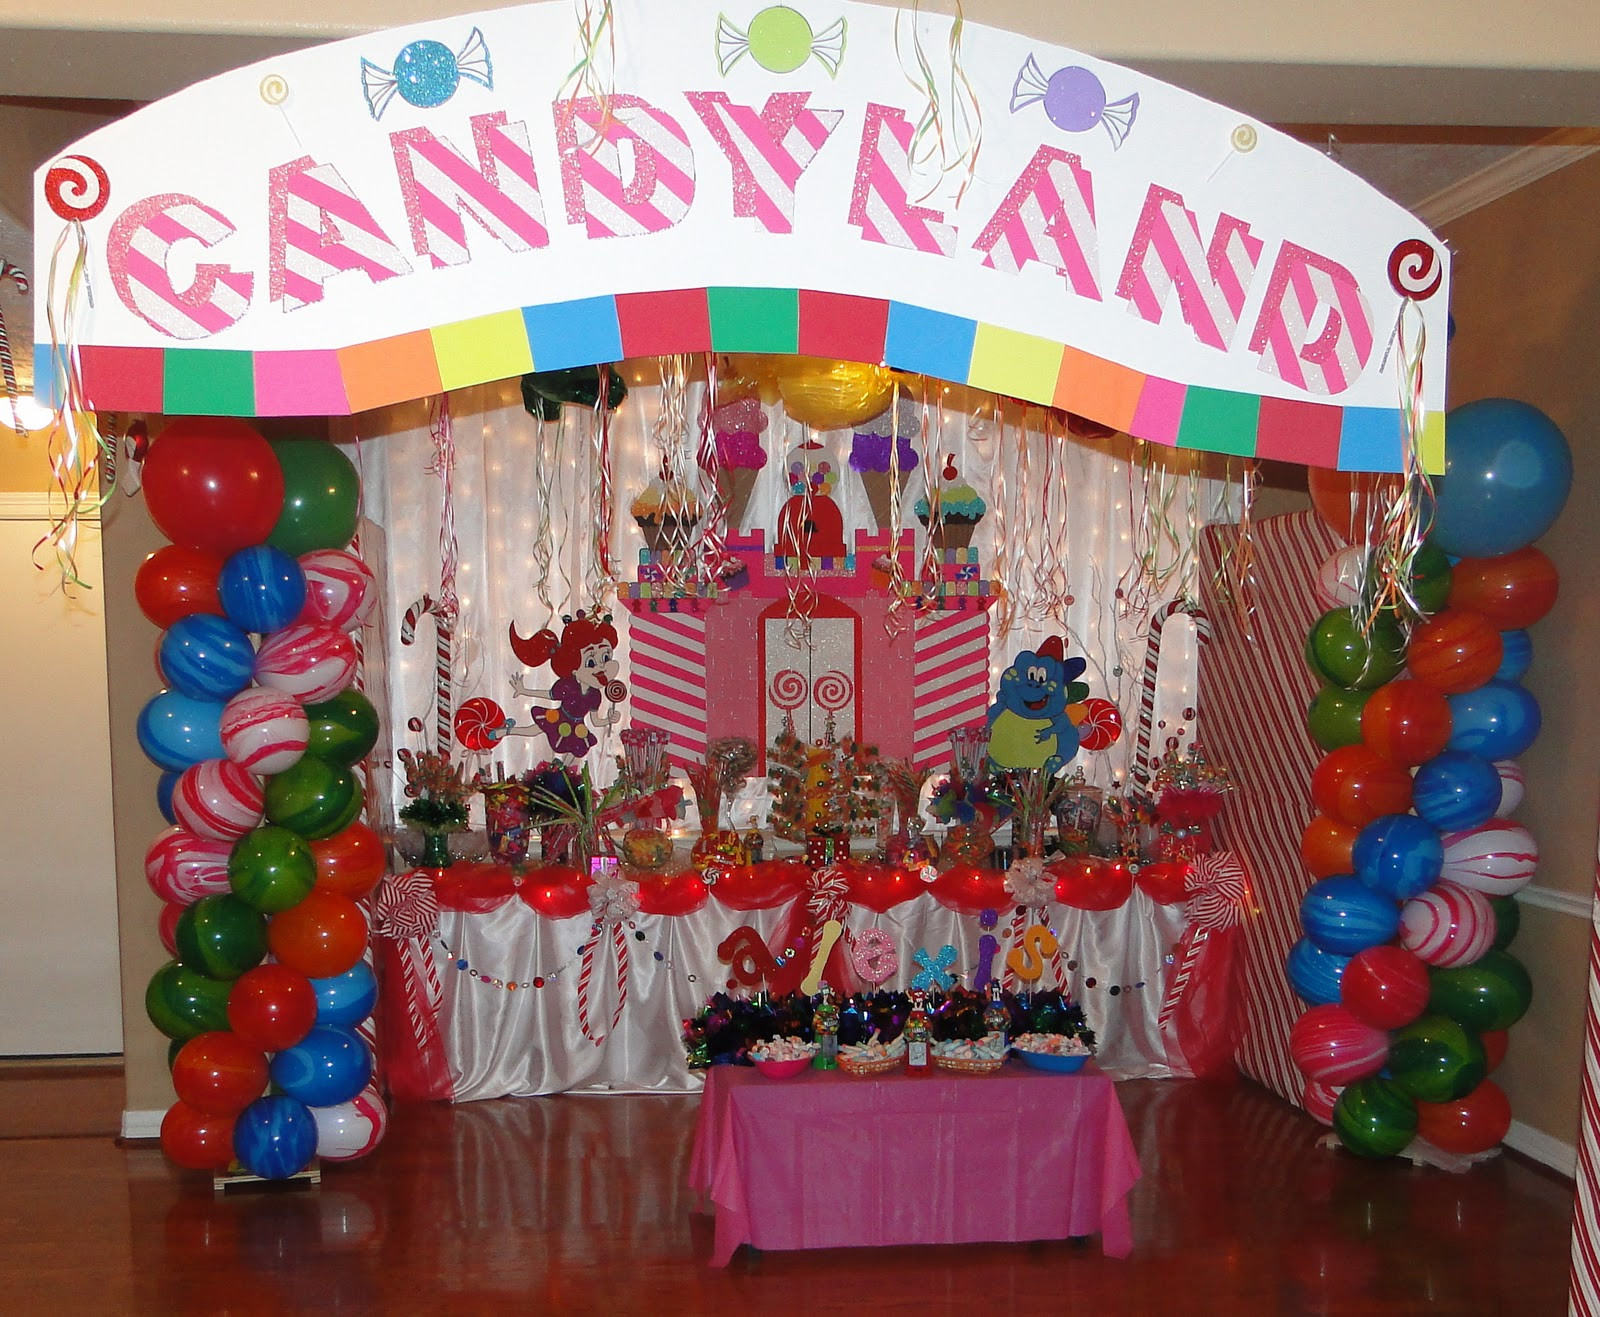 Candyland Birthday Party Ideas
 Unfor table Creations Designed by Maria Candyland